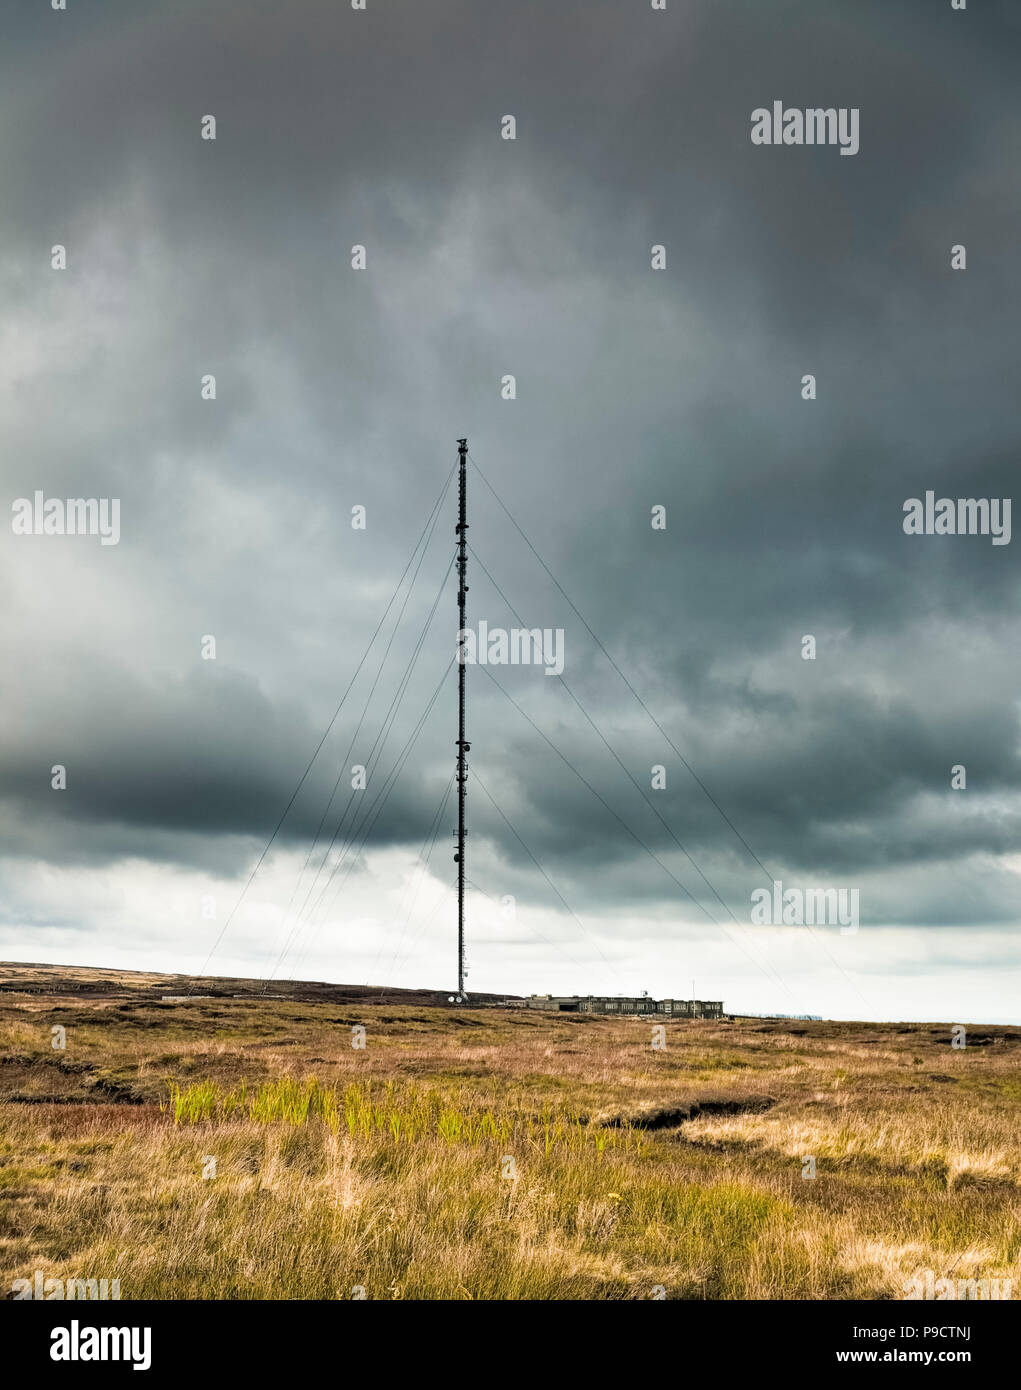 The Holme Moss tv transmitter tower on the West Yorkshire Moors, Pennines, Peak District, England, UK Stock Photo